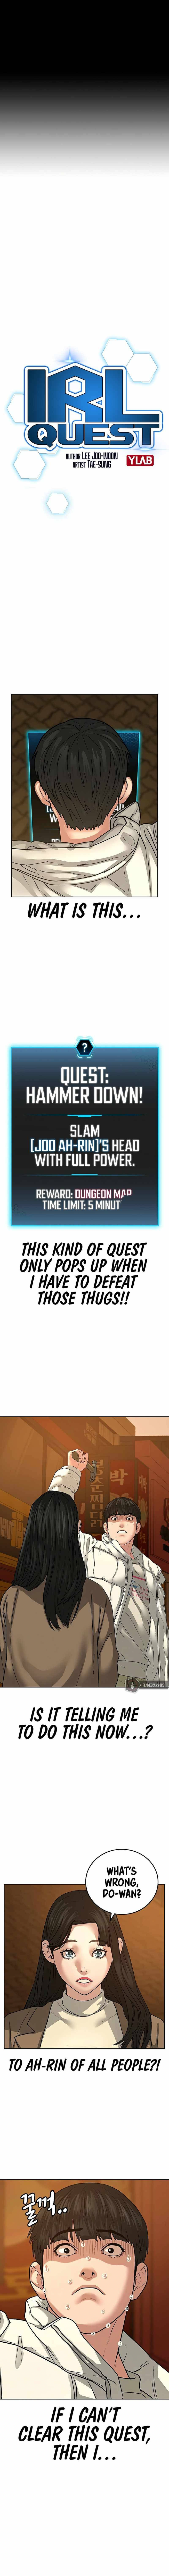 reality_quest_18_1